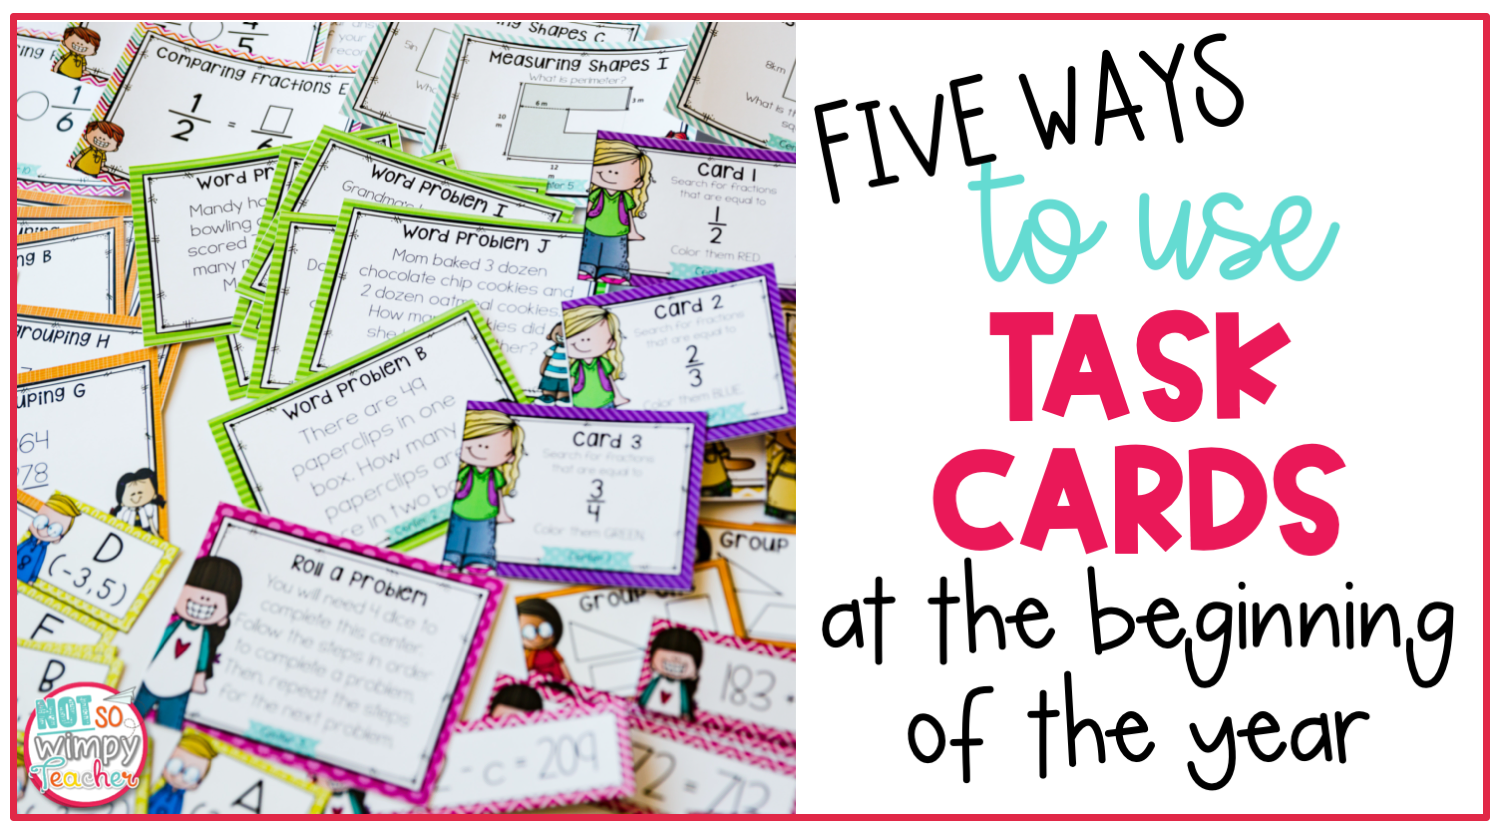 Task Card Fun with Sticky Hands! - Minds in Bloom